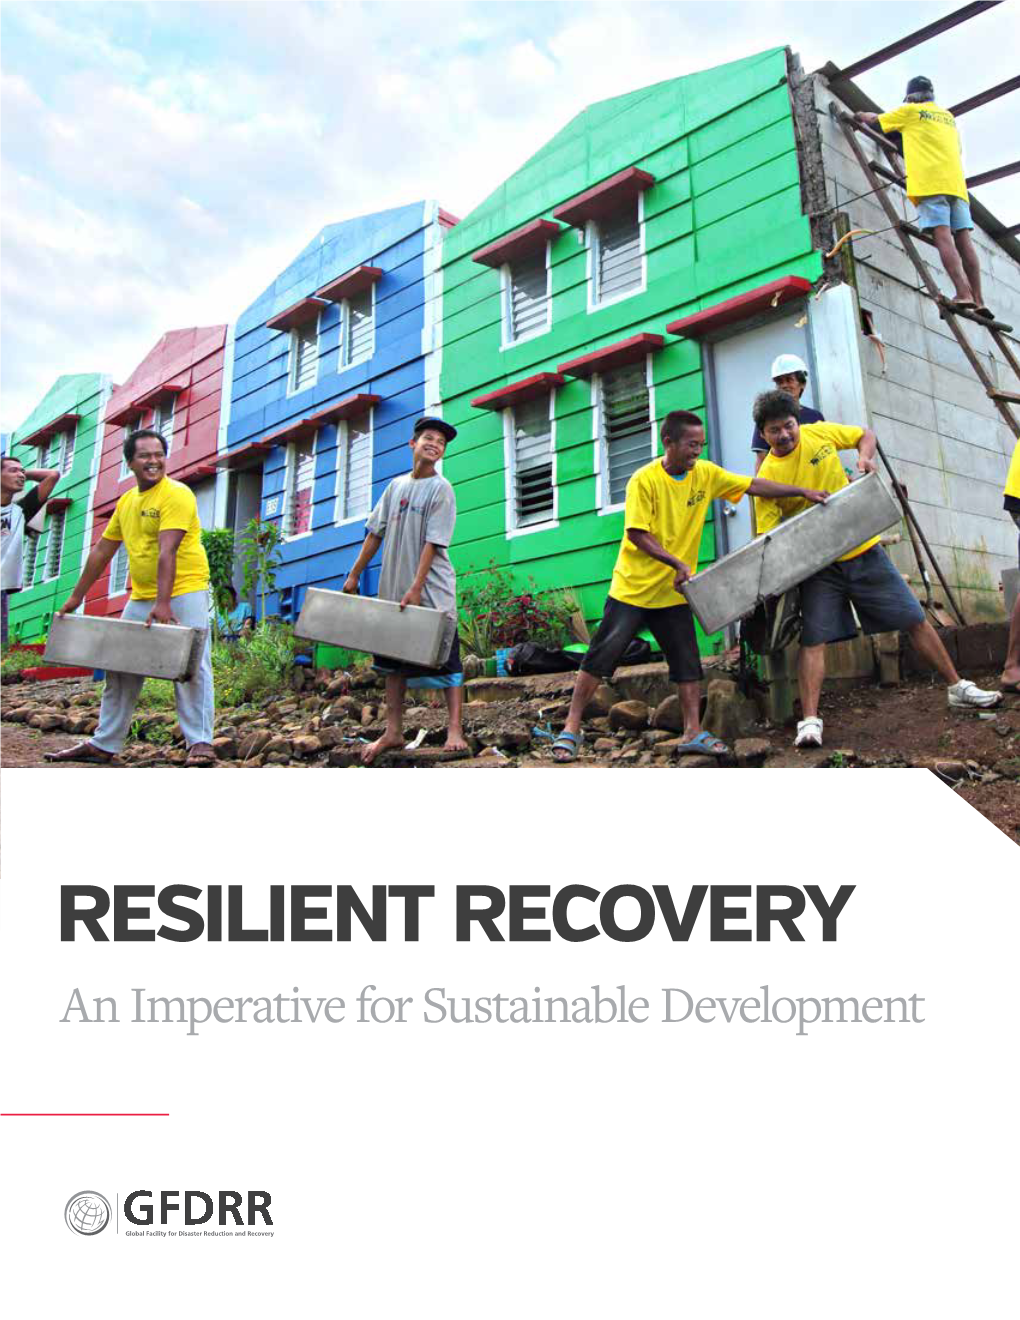 Resilient Recovery: an Imperative for Sustainable Development